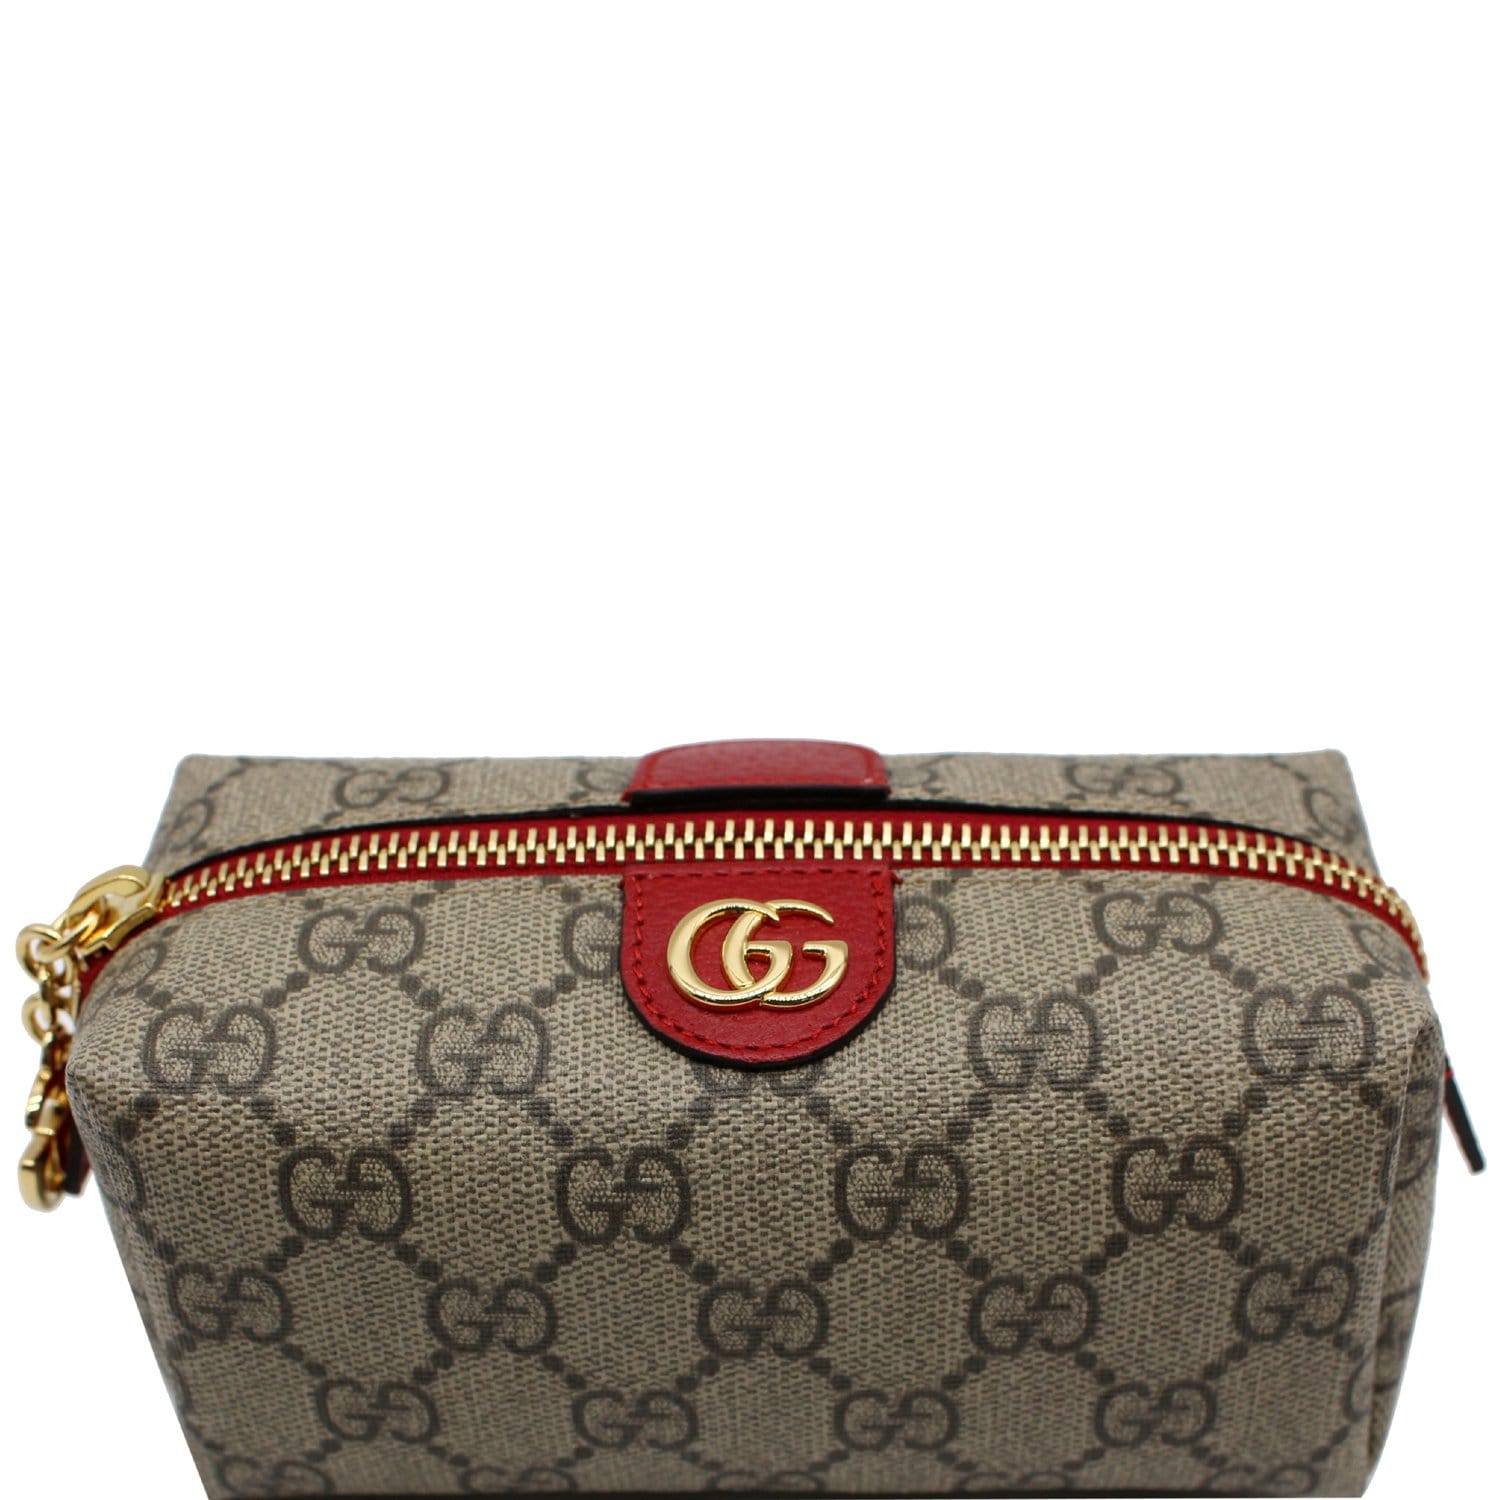 Ophidia Large GG Supreme Cosmetics Case in Beige - Gucci